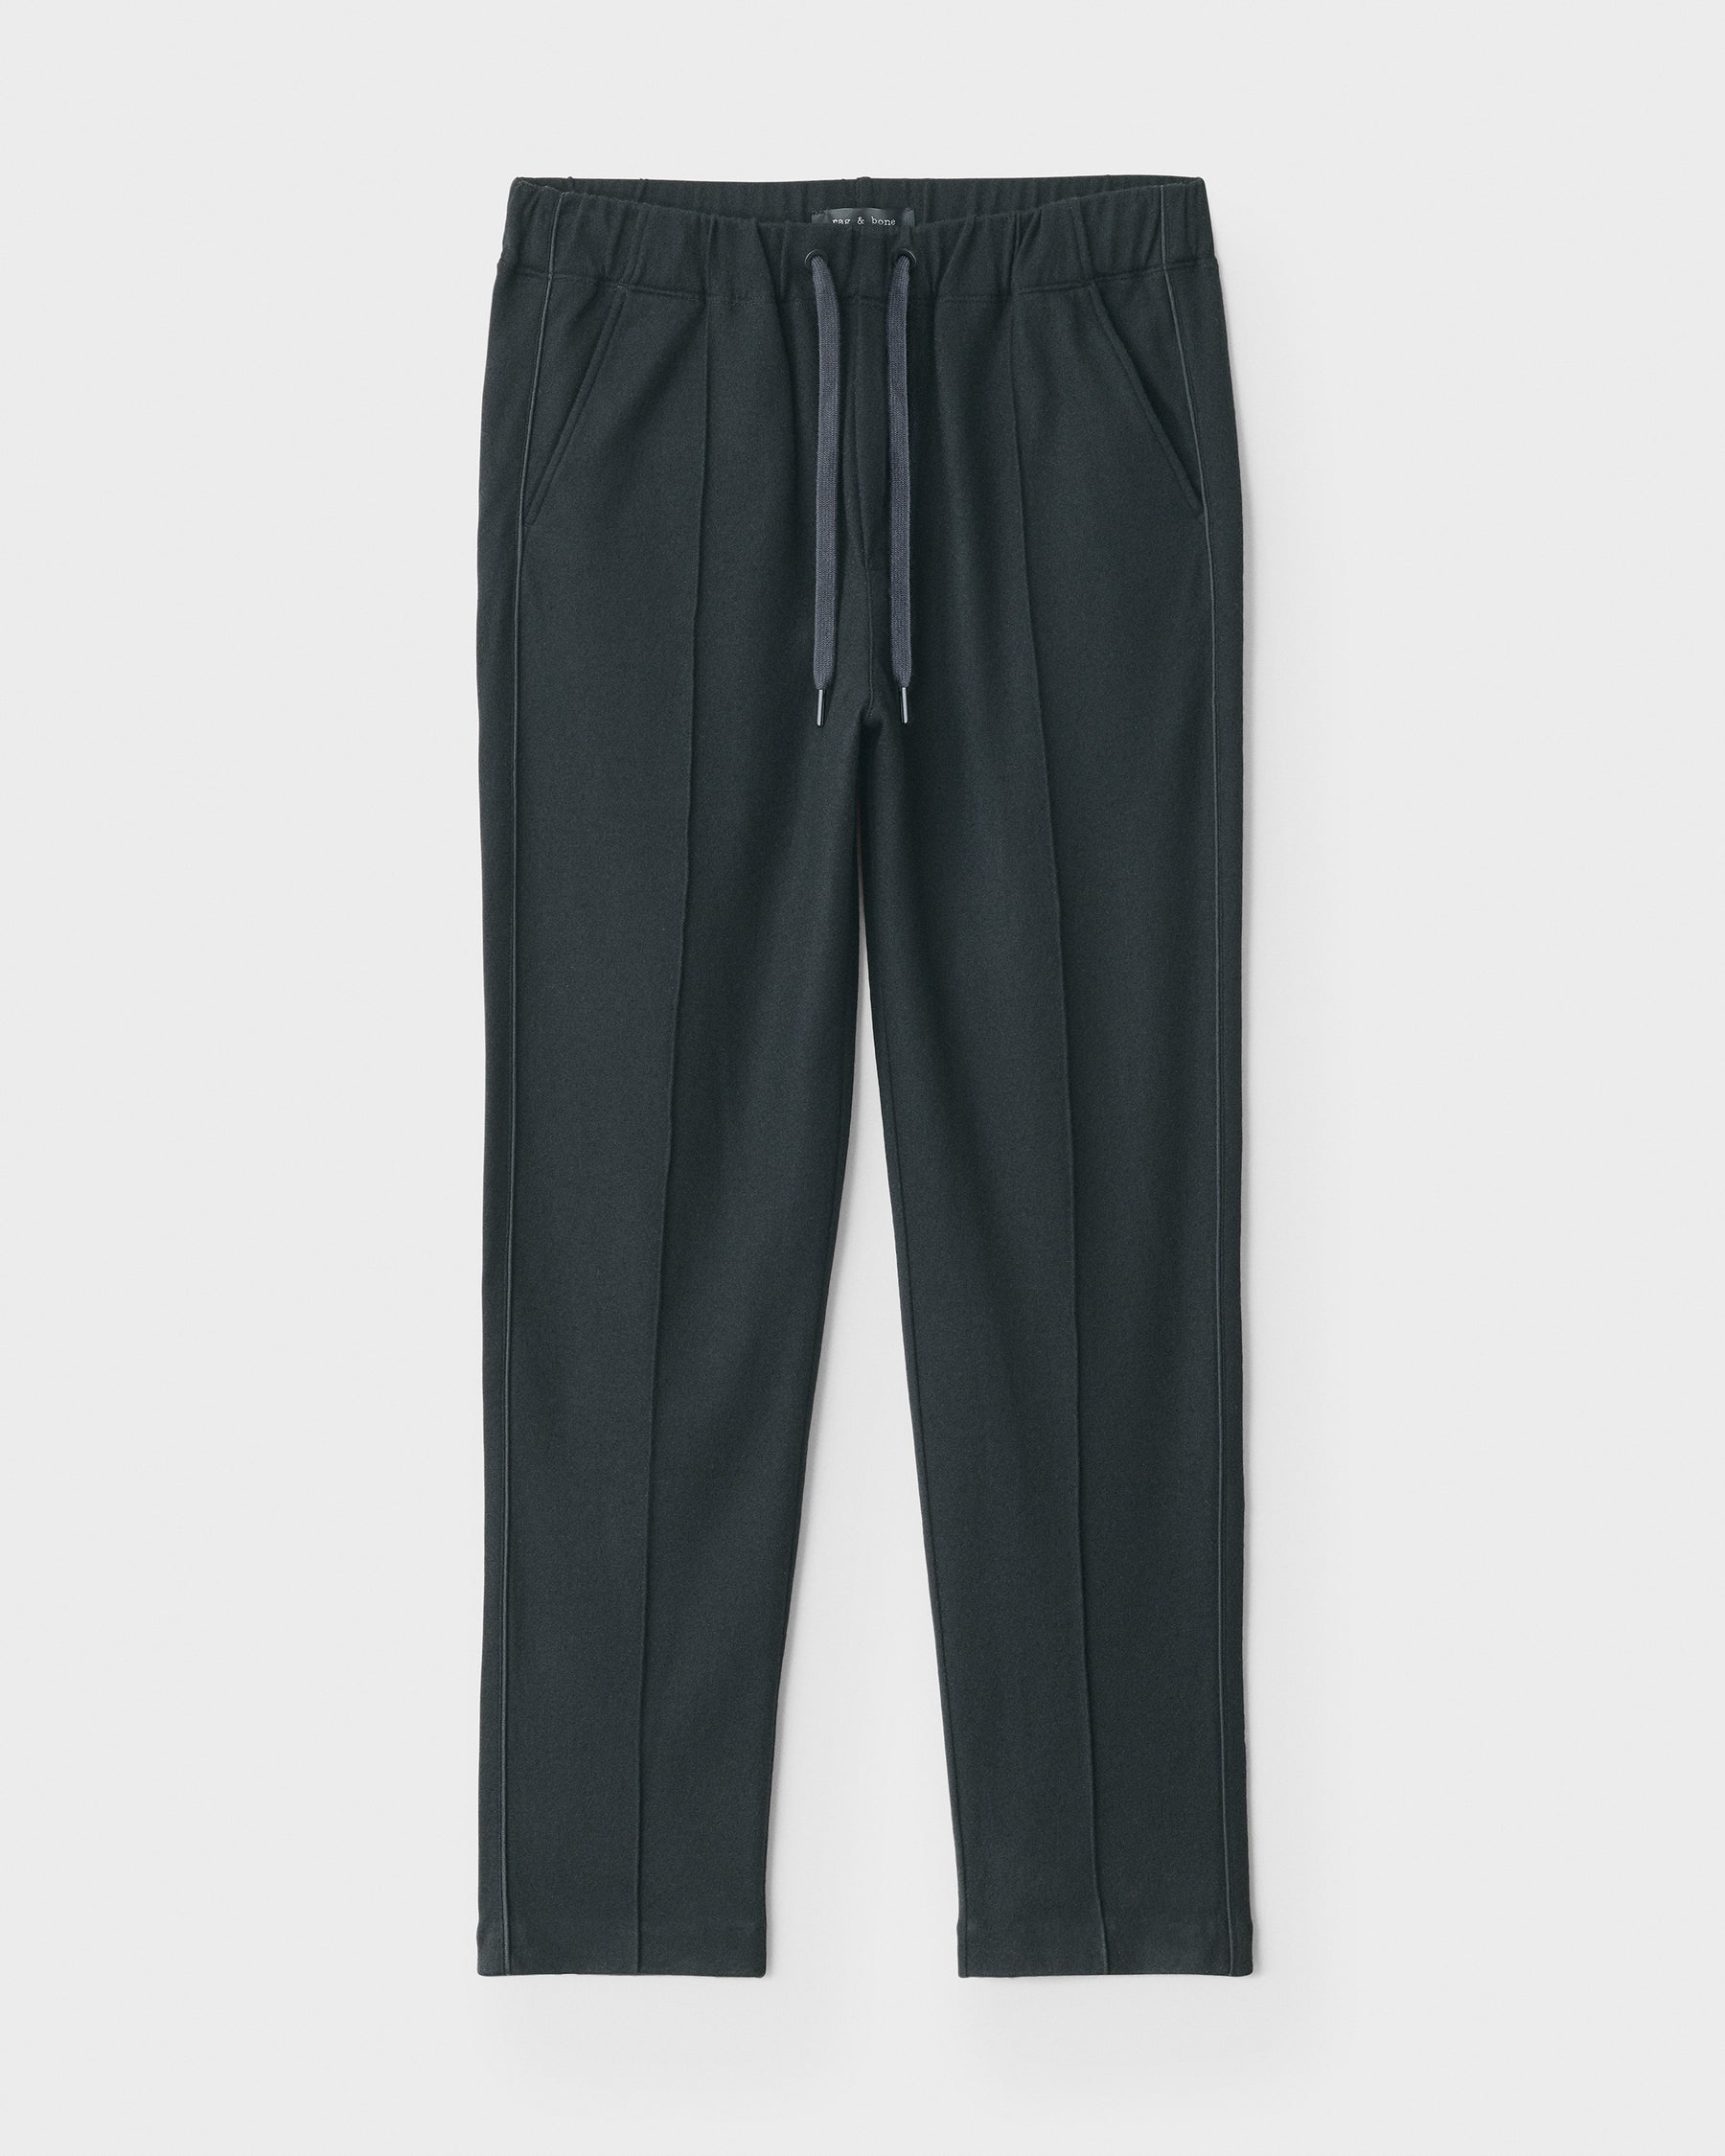 Andrew Japanese Knit Pant